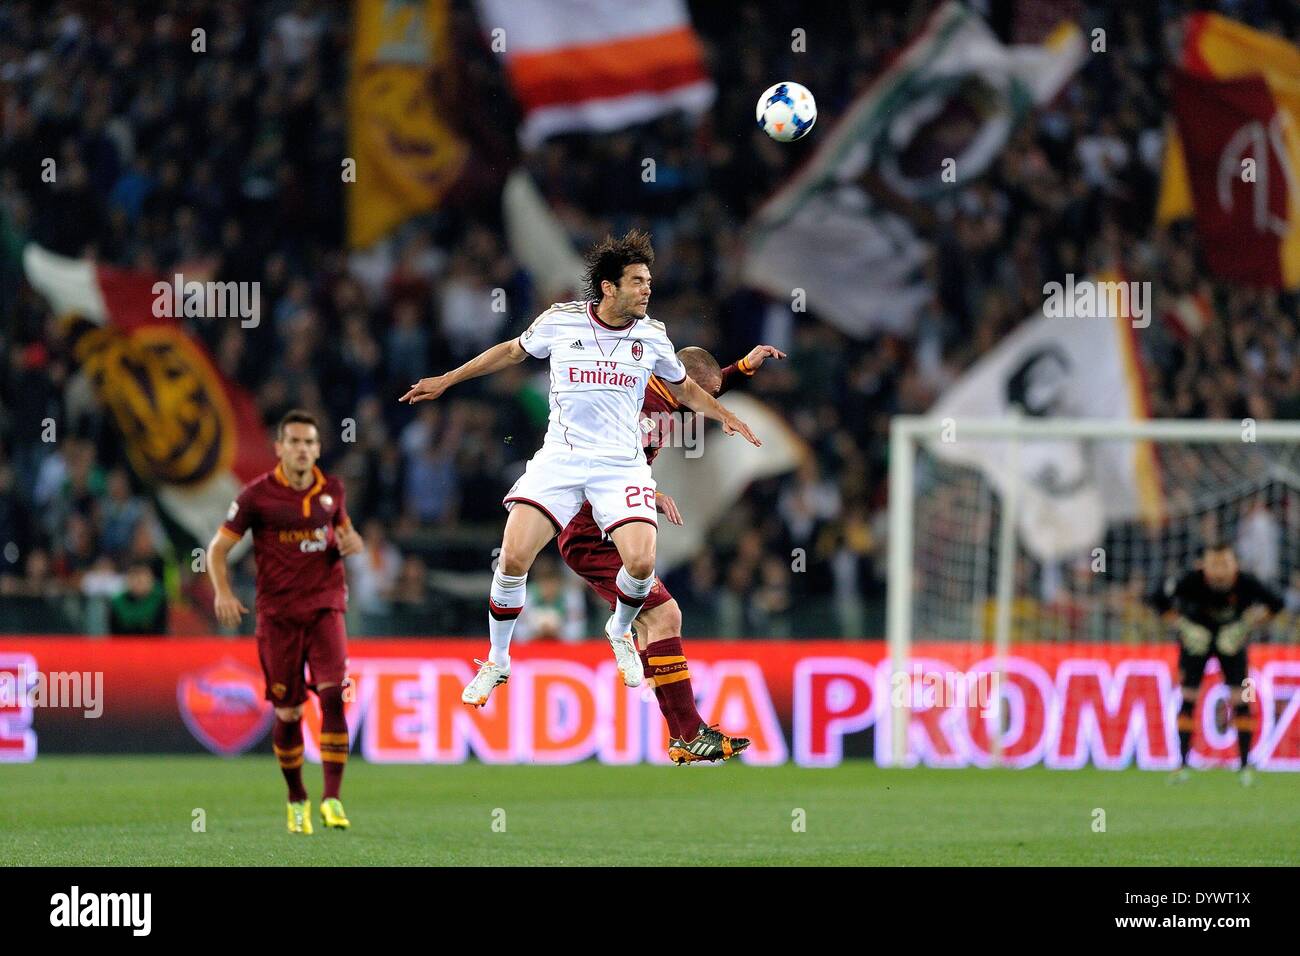 Rome, Italy. 26th Apr, 2014. Rome, Italy - 25th Apr, 2014. Kaka' during Football/Soccer Italian Serie A match between AS Roma and AC Milan at Stadio Olimpico in Rome, Italy. Credit:  Vincenzo Artiano/NurPhoto/ZUMAPRESS.com/Alamy Live News Stock Photo